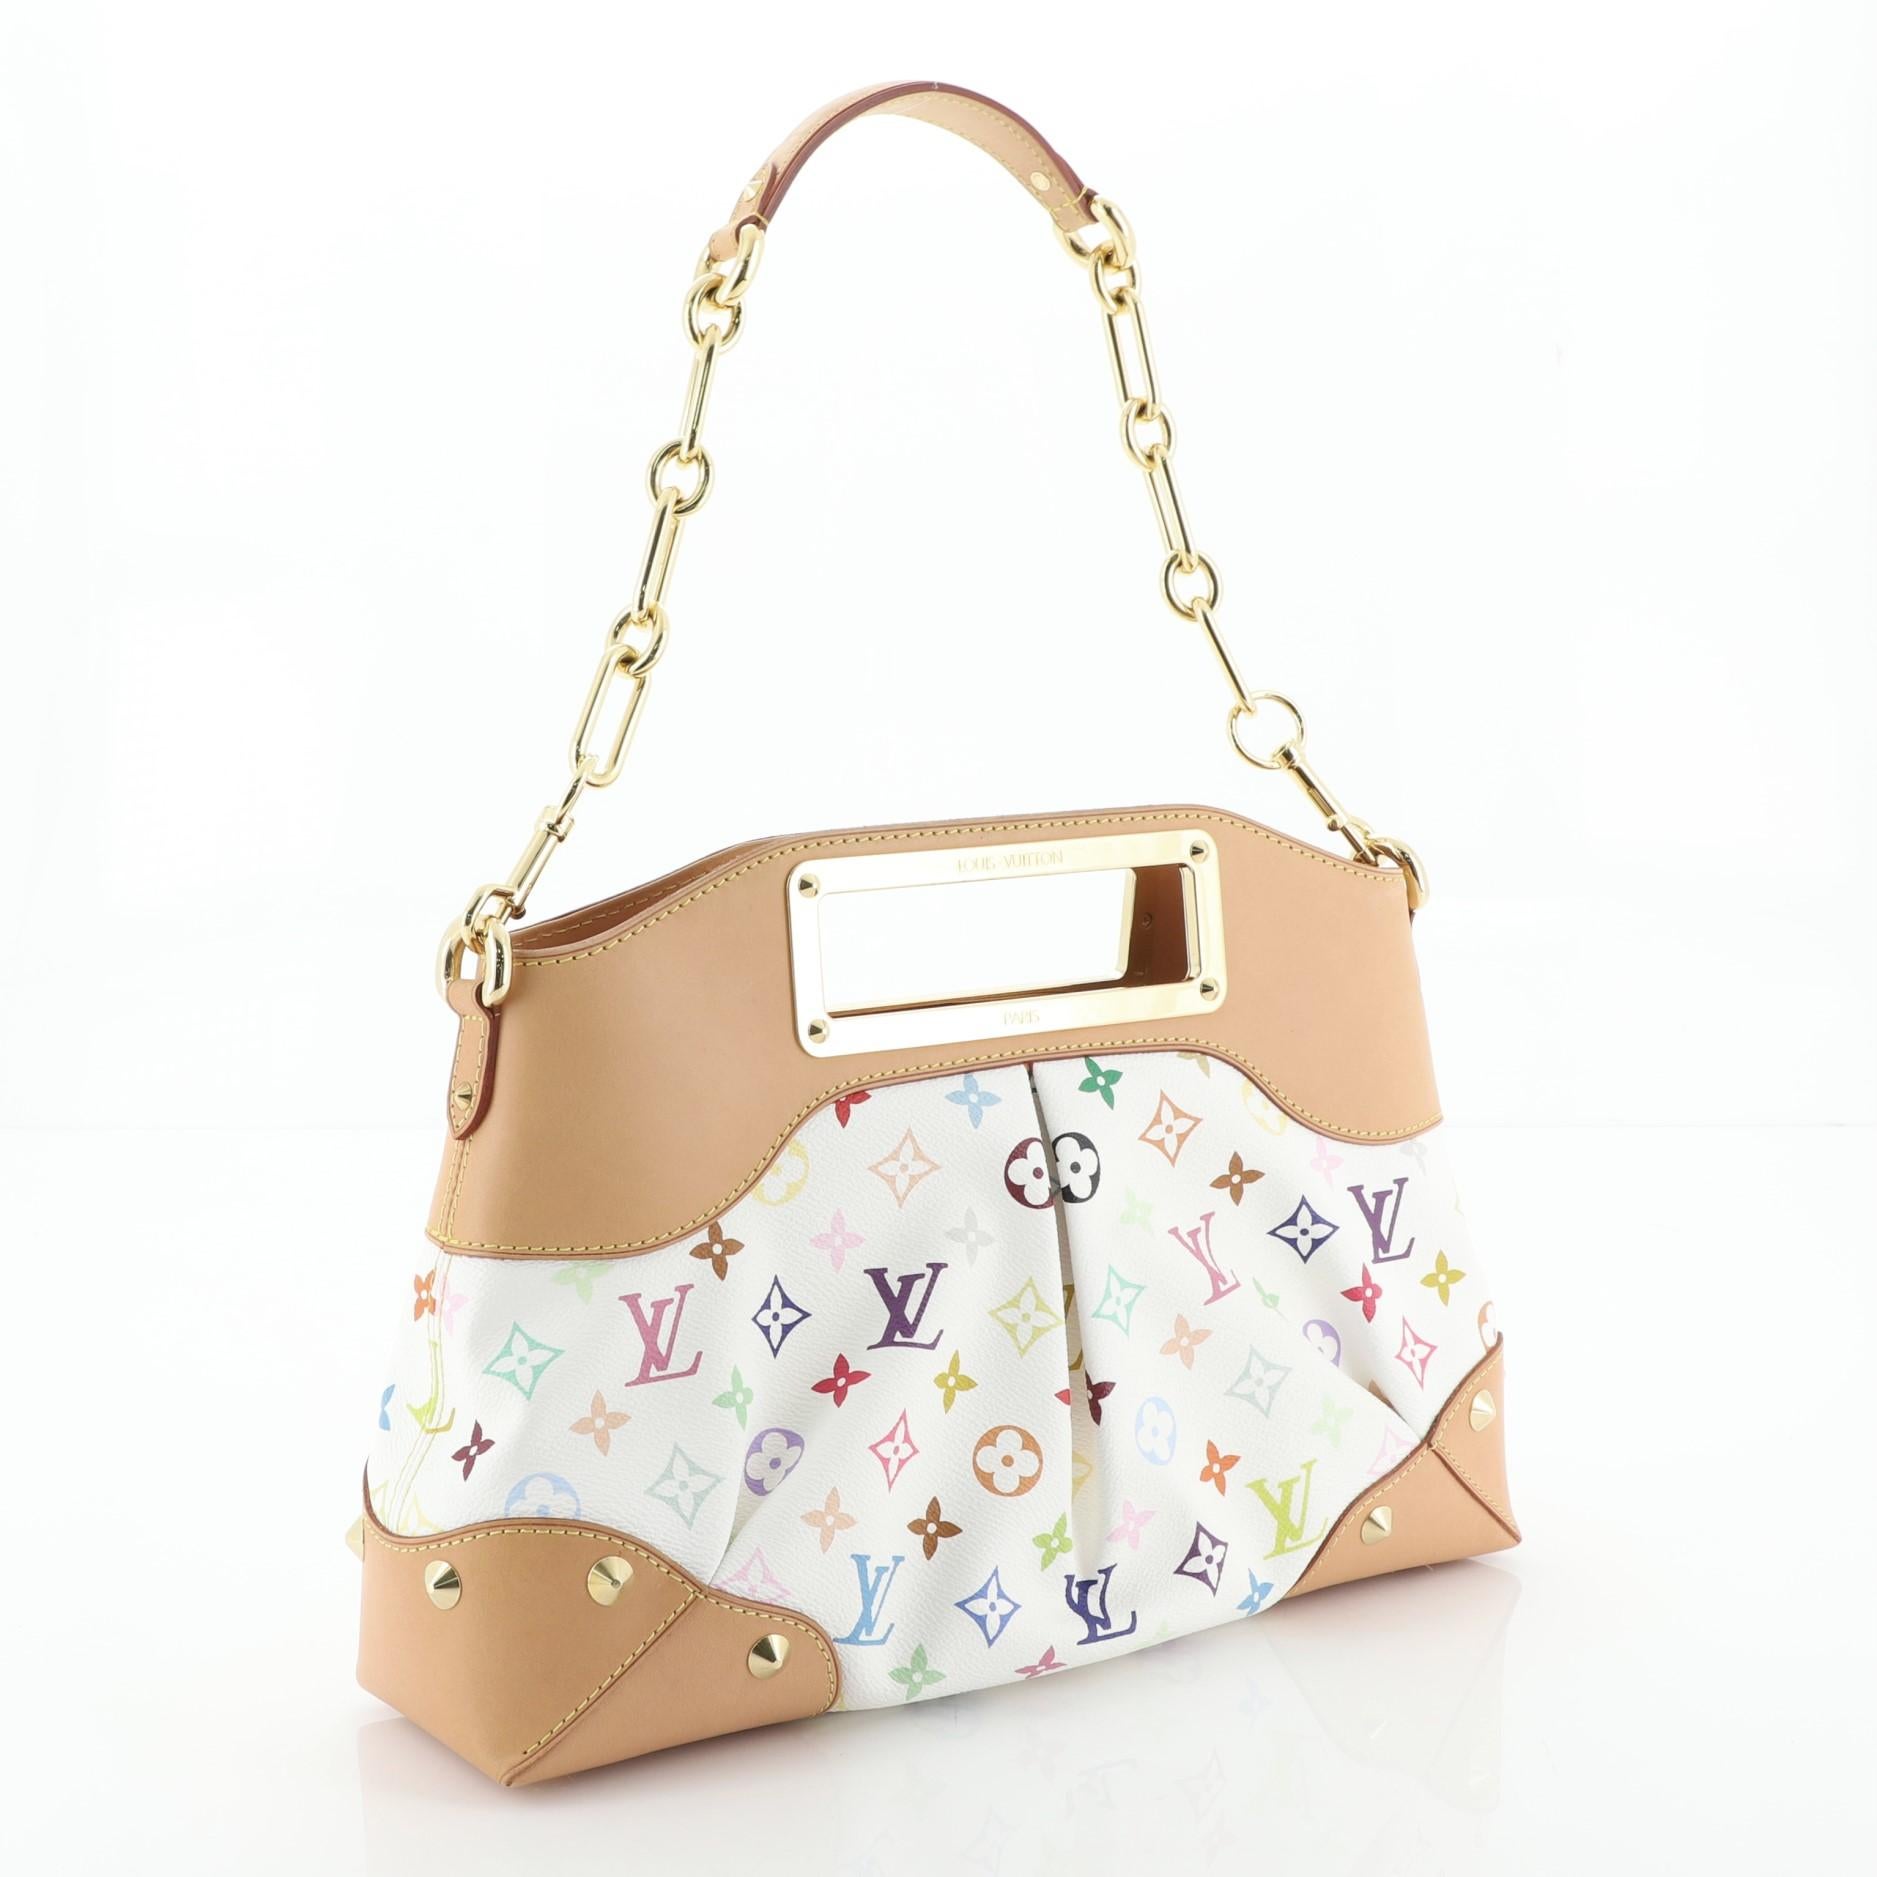 This Louis Vuitton Judy Handbag Monogram Multicolor MM, crafted from white monogram multicolor coated canvas, features chain link strap with leather pad, logo engraved cut-out handles, protective base studs, and gold-tone hardware. Its magnetic snap